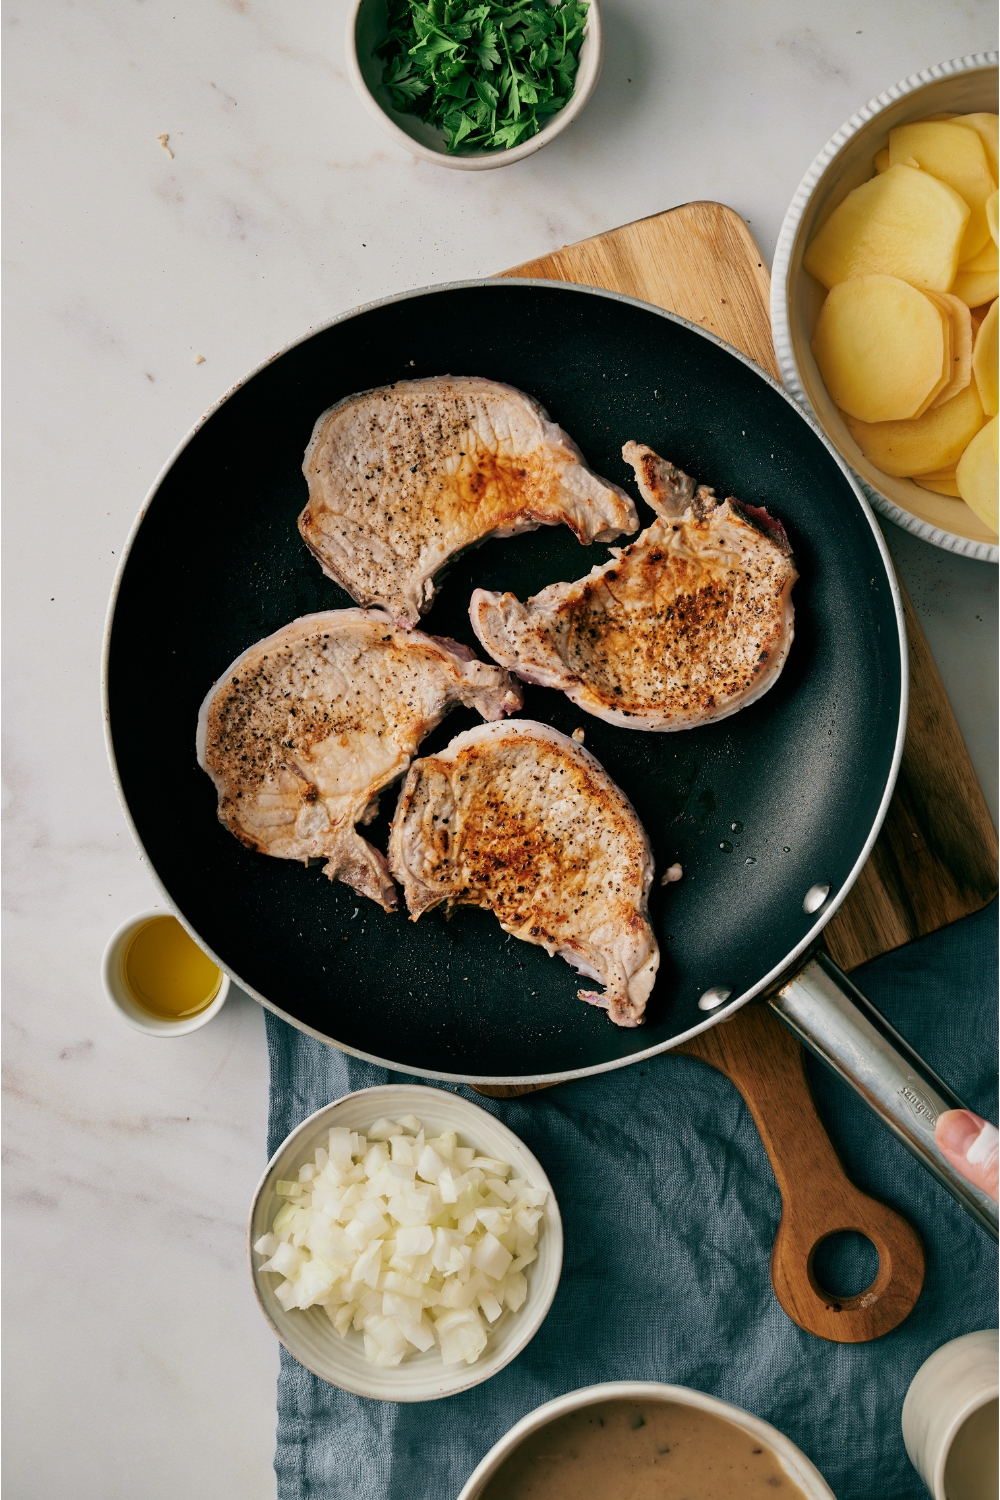 Four boneless pork chops being seared on a black skillet that's surrounded by an assortment of ingredients.